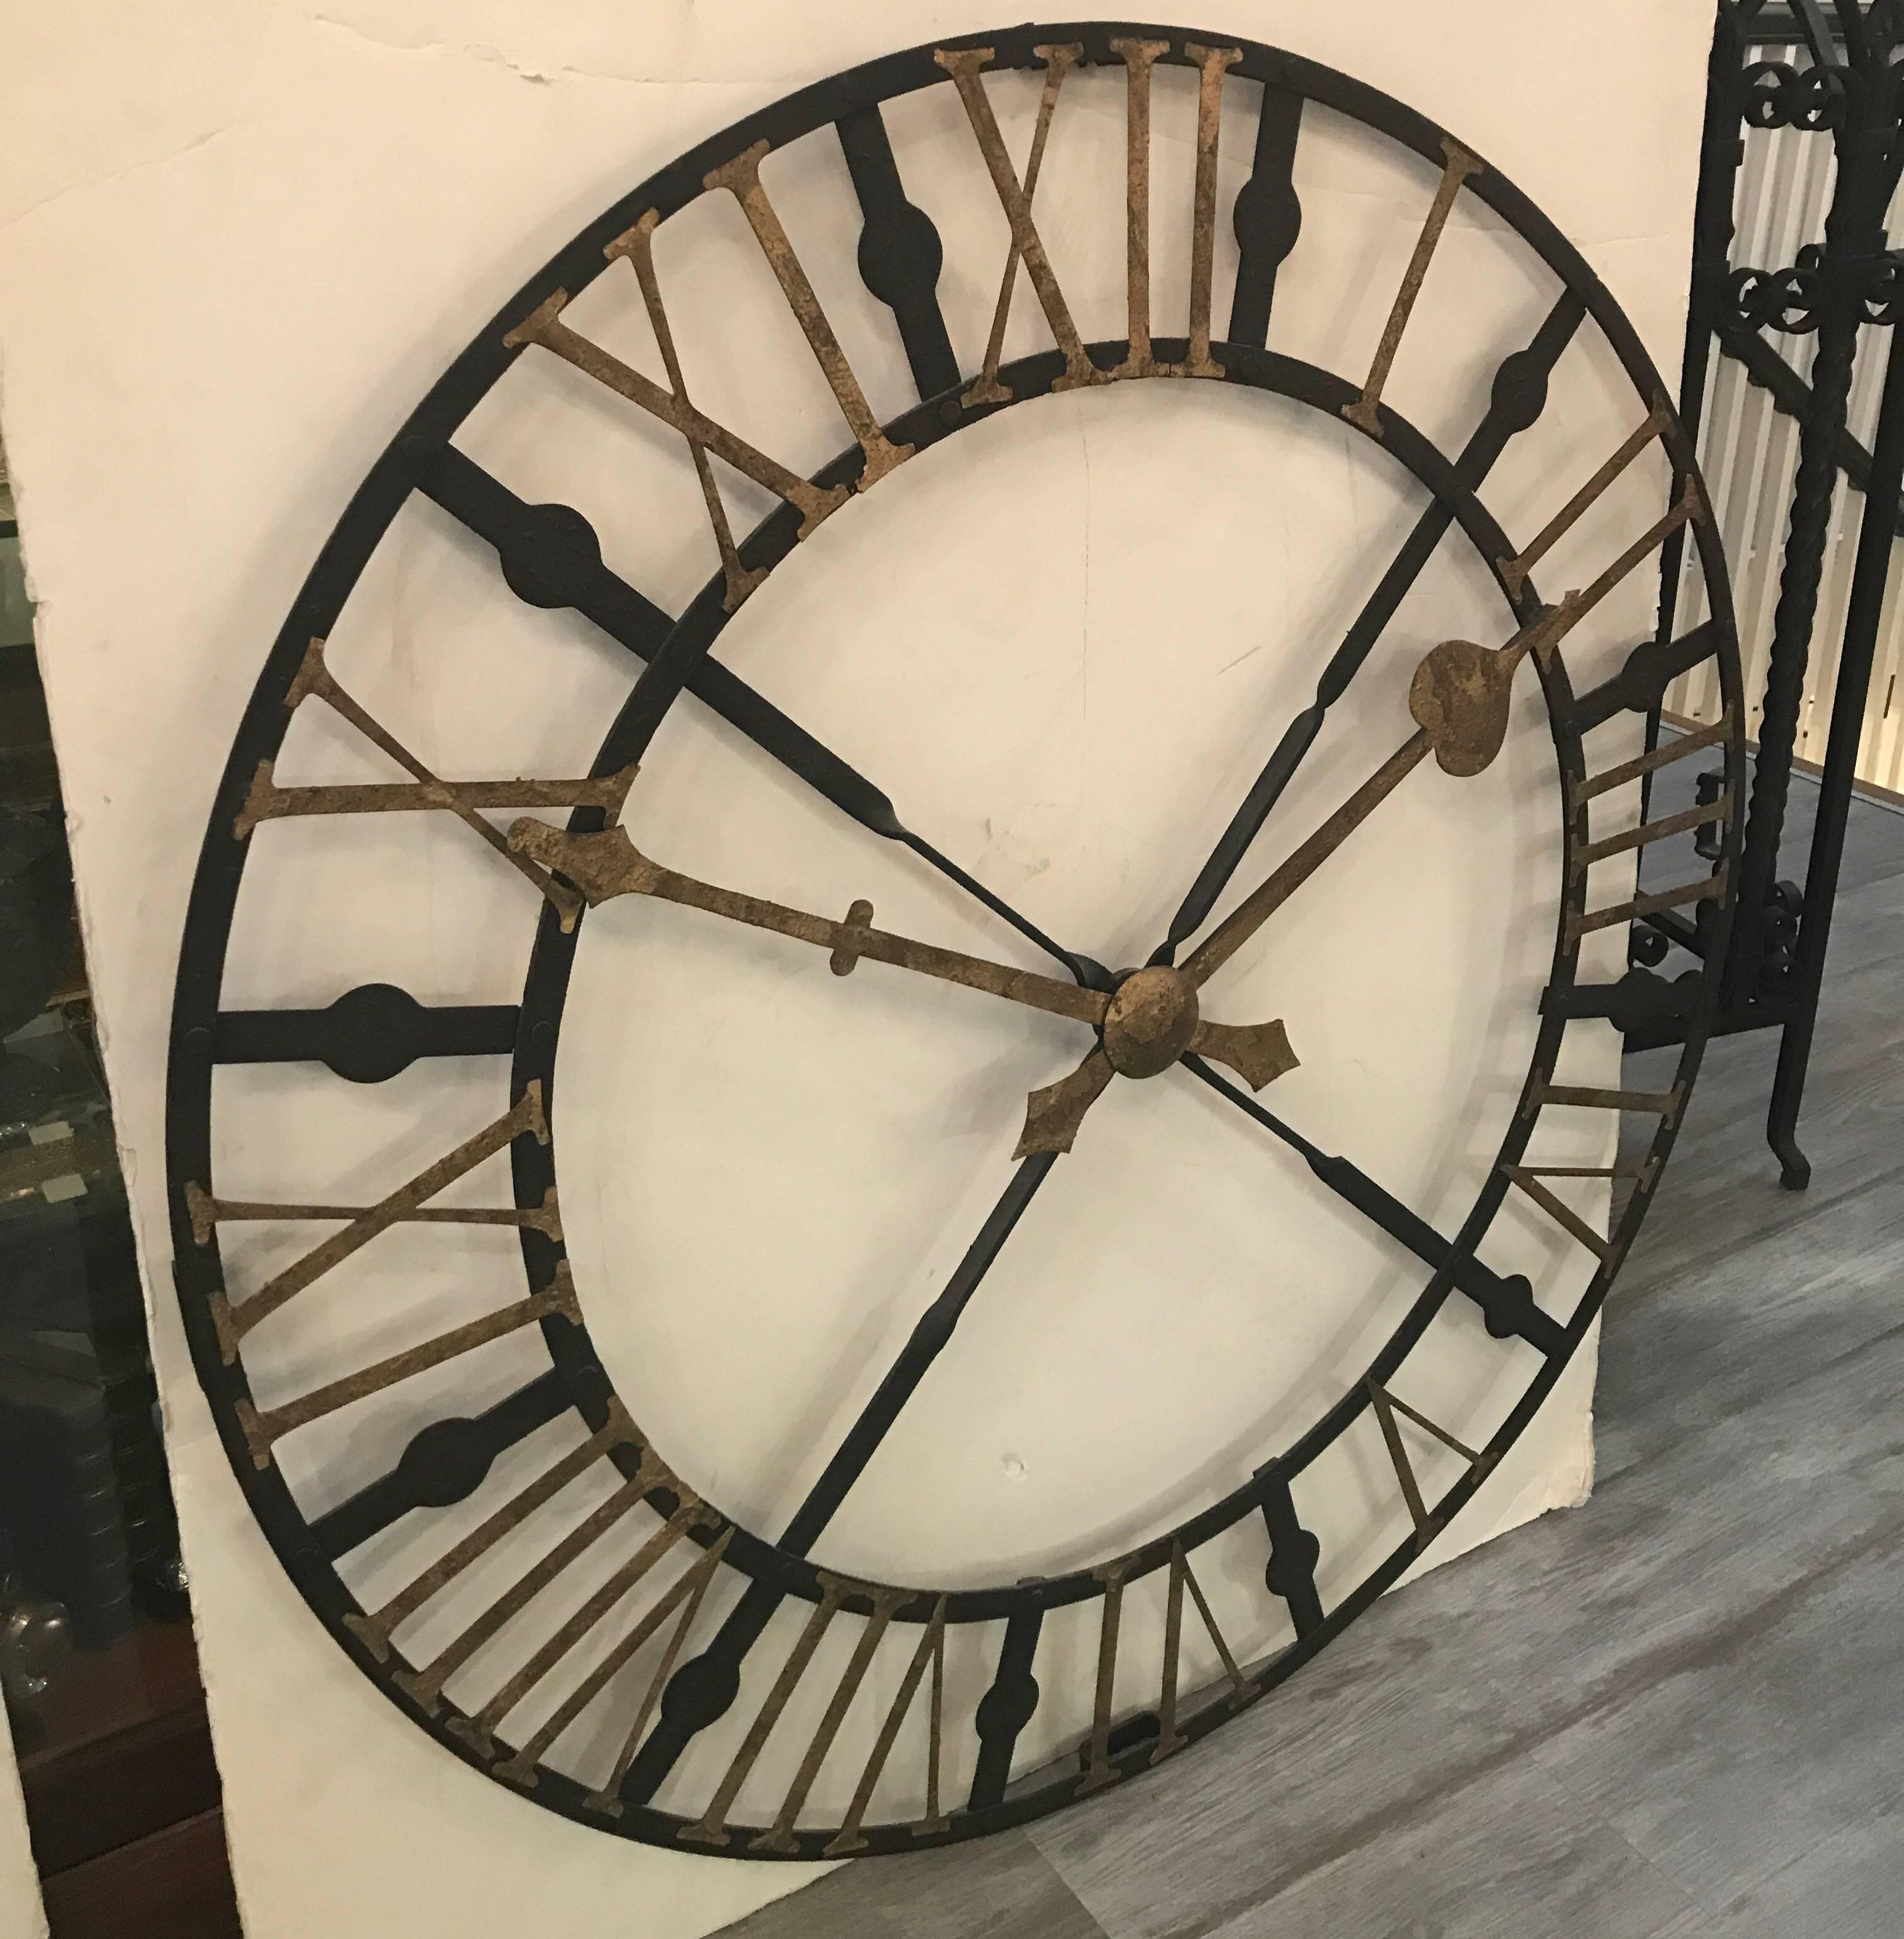 Large weather iron 42 inch clock face with roman numerals. This is a decorative wall decoration with gilt numerals, hour and minute hand that is not a time piece. The hands are stationary. The weathered iron finish is intentional.